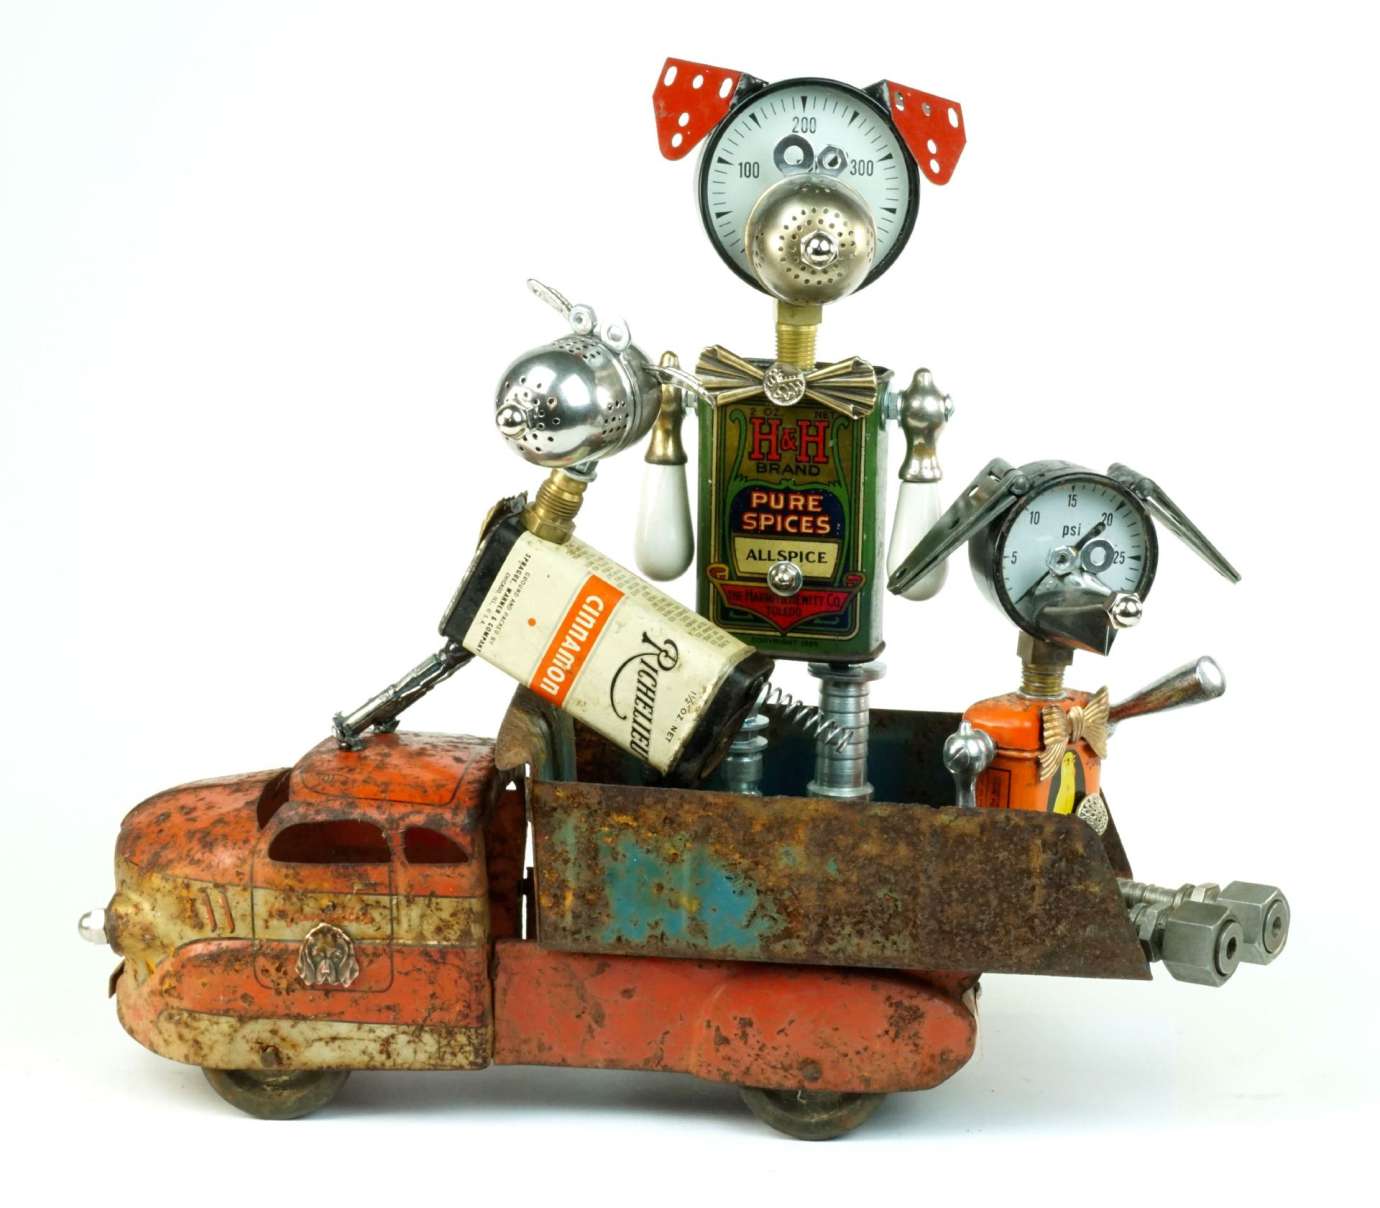 A sculpture of a person and two dogs riding in a truck made from found objects by artist Amy Flynn